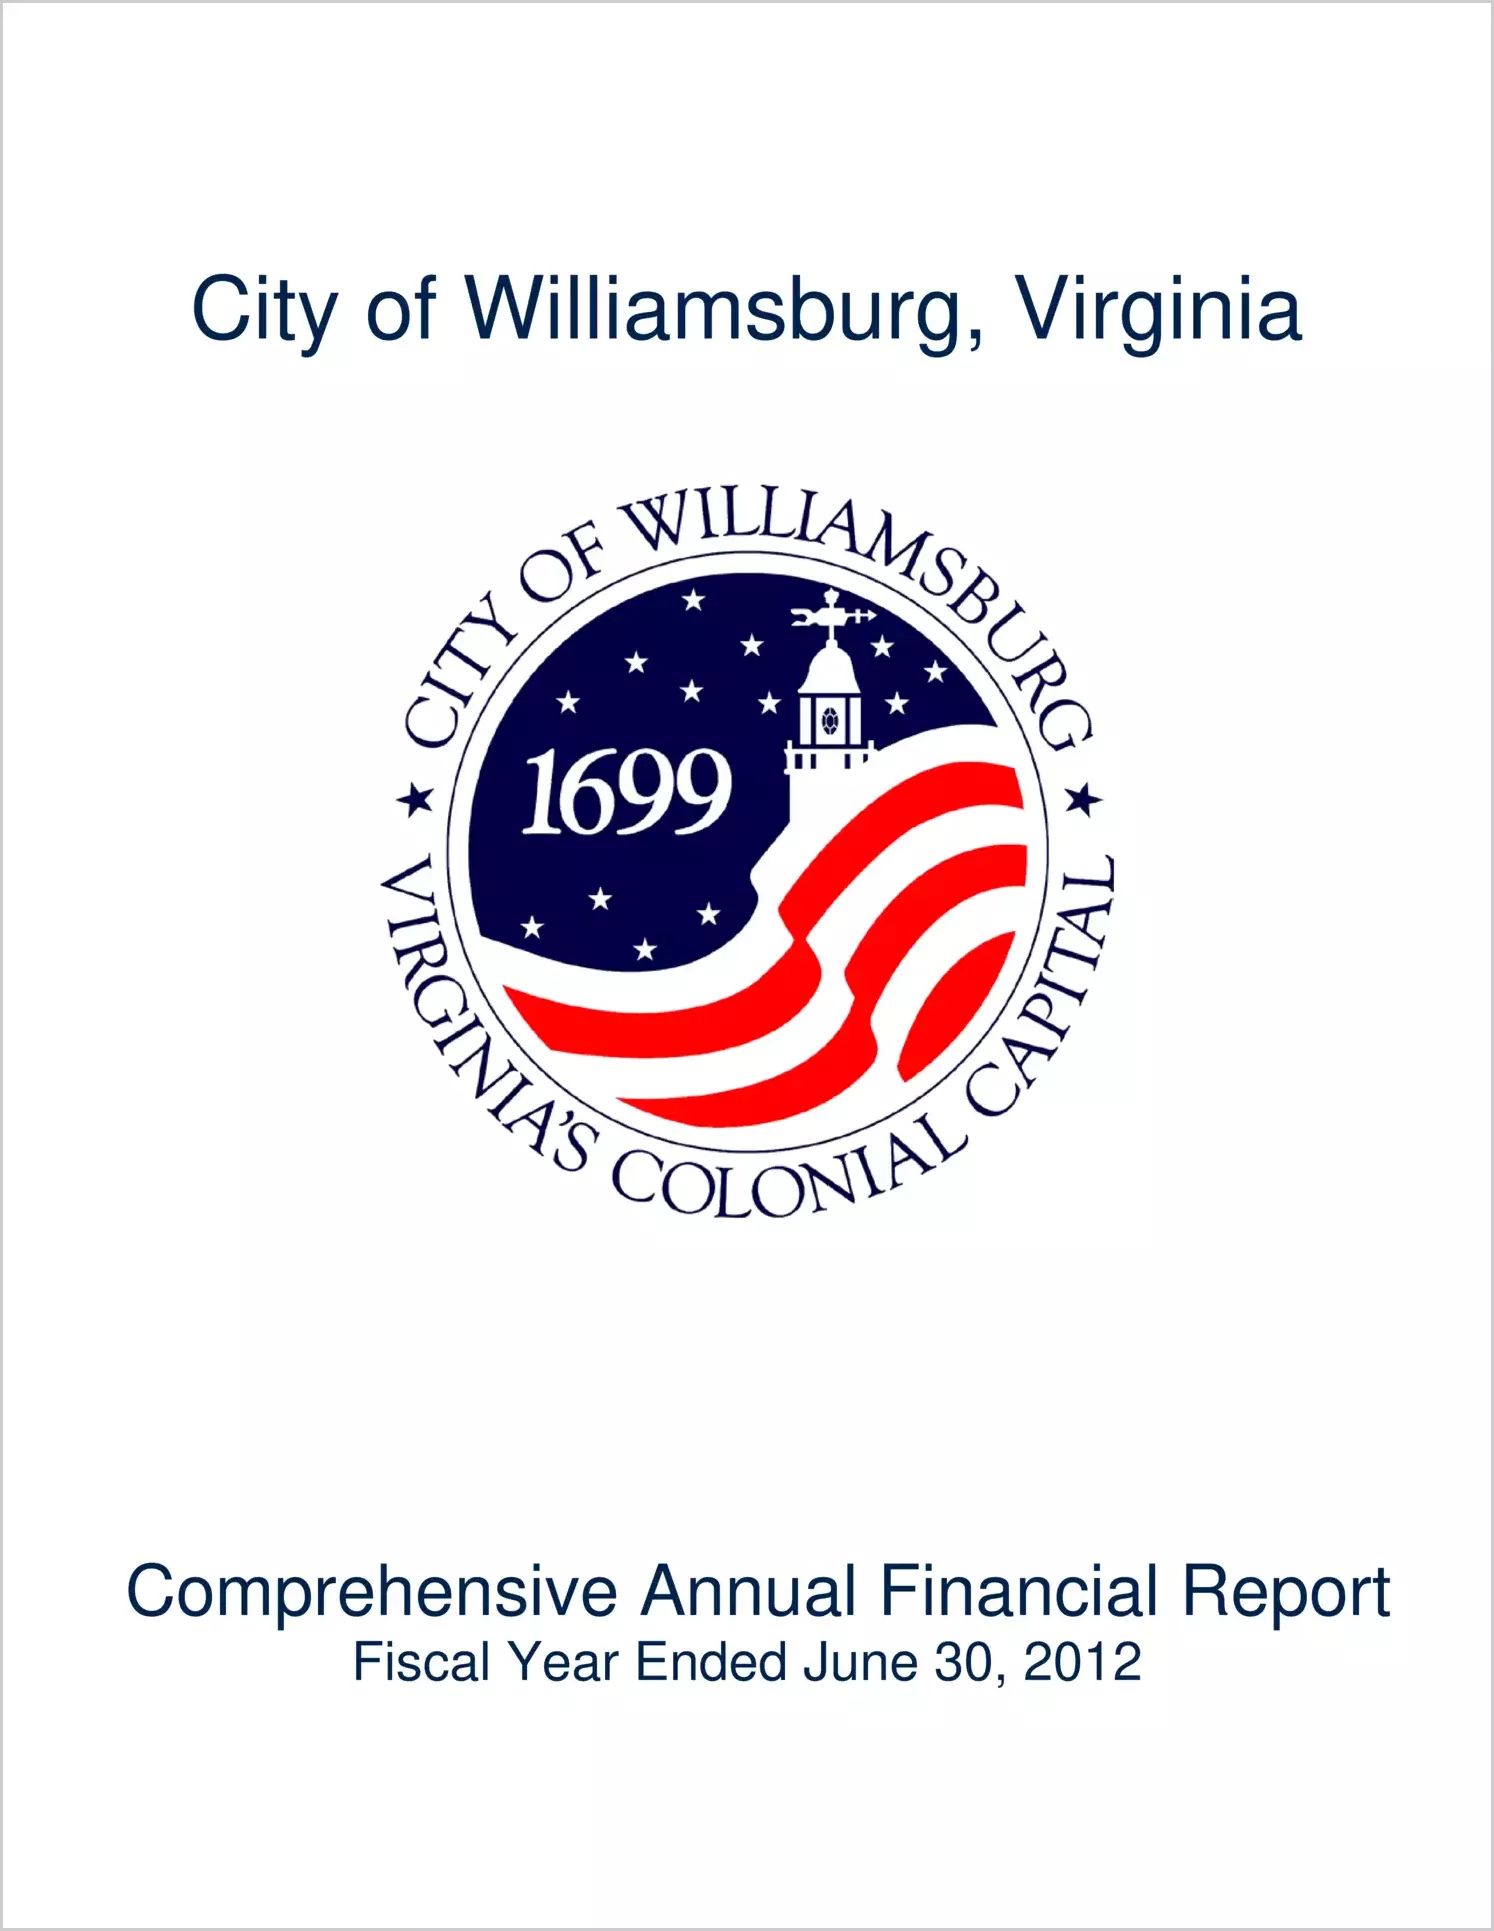 2012 Annual Financial Report for City of Williamsburg